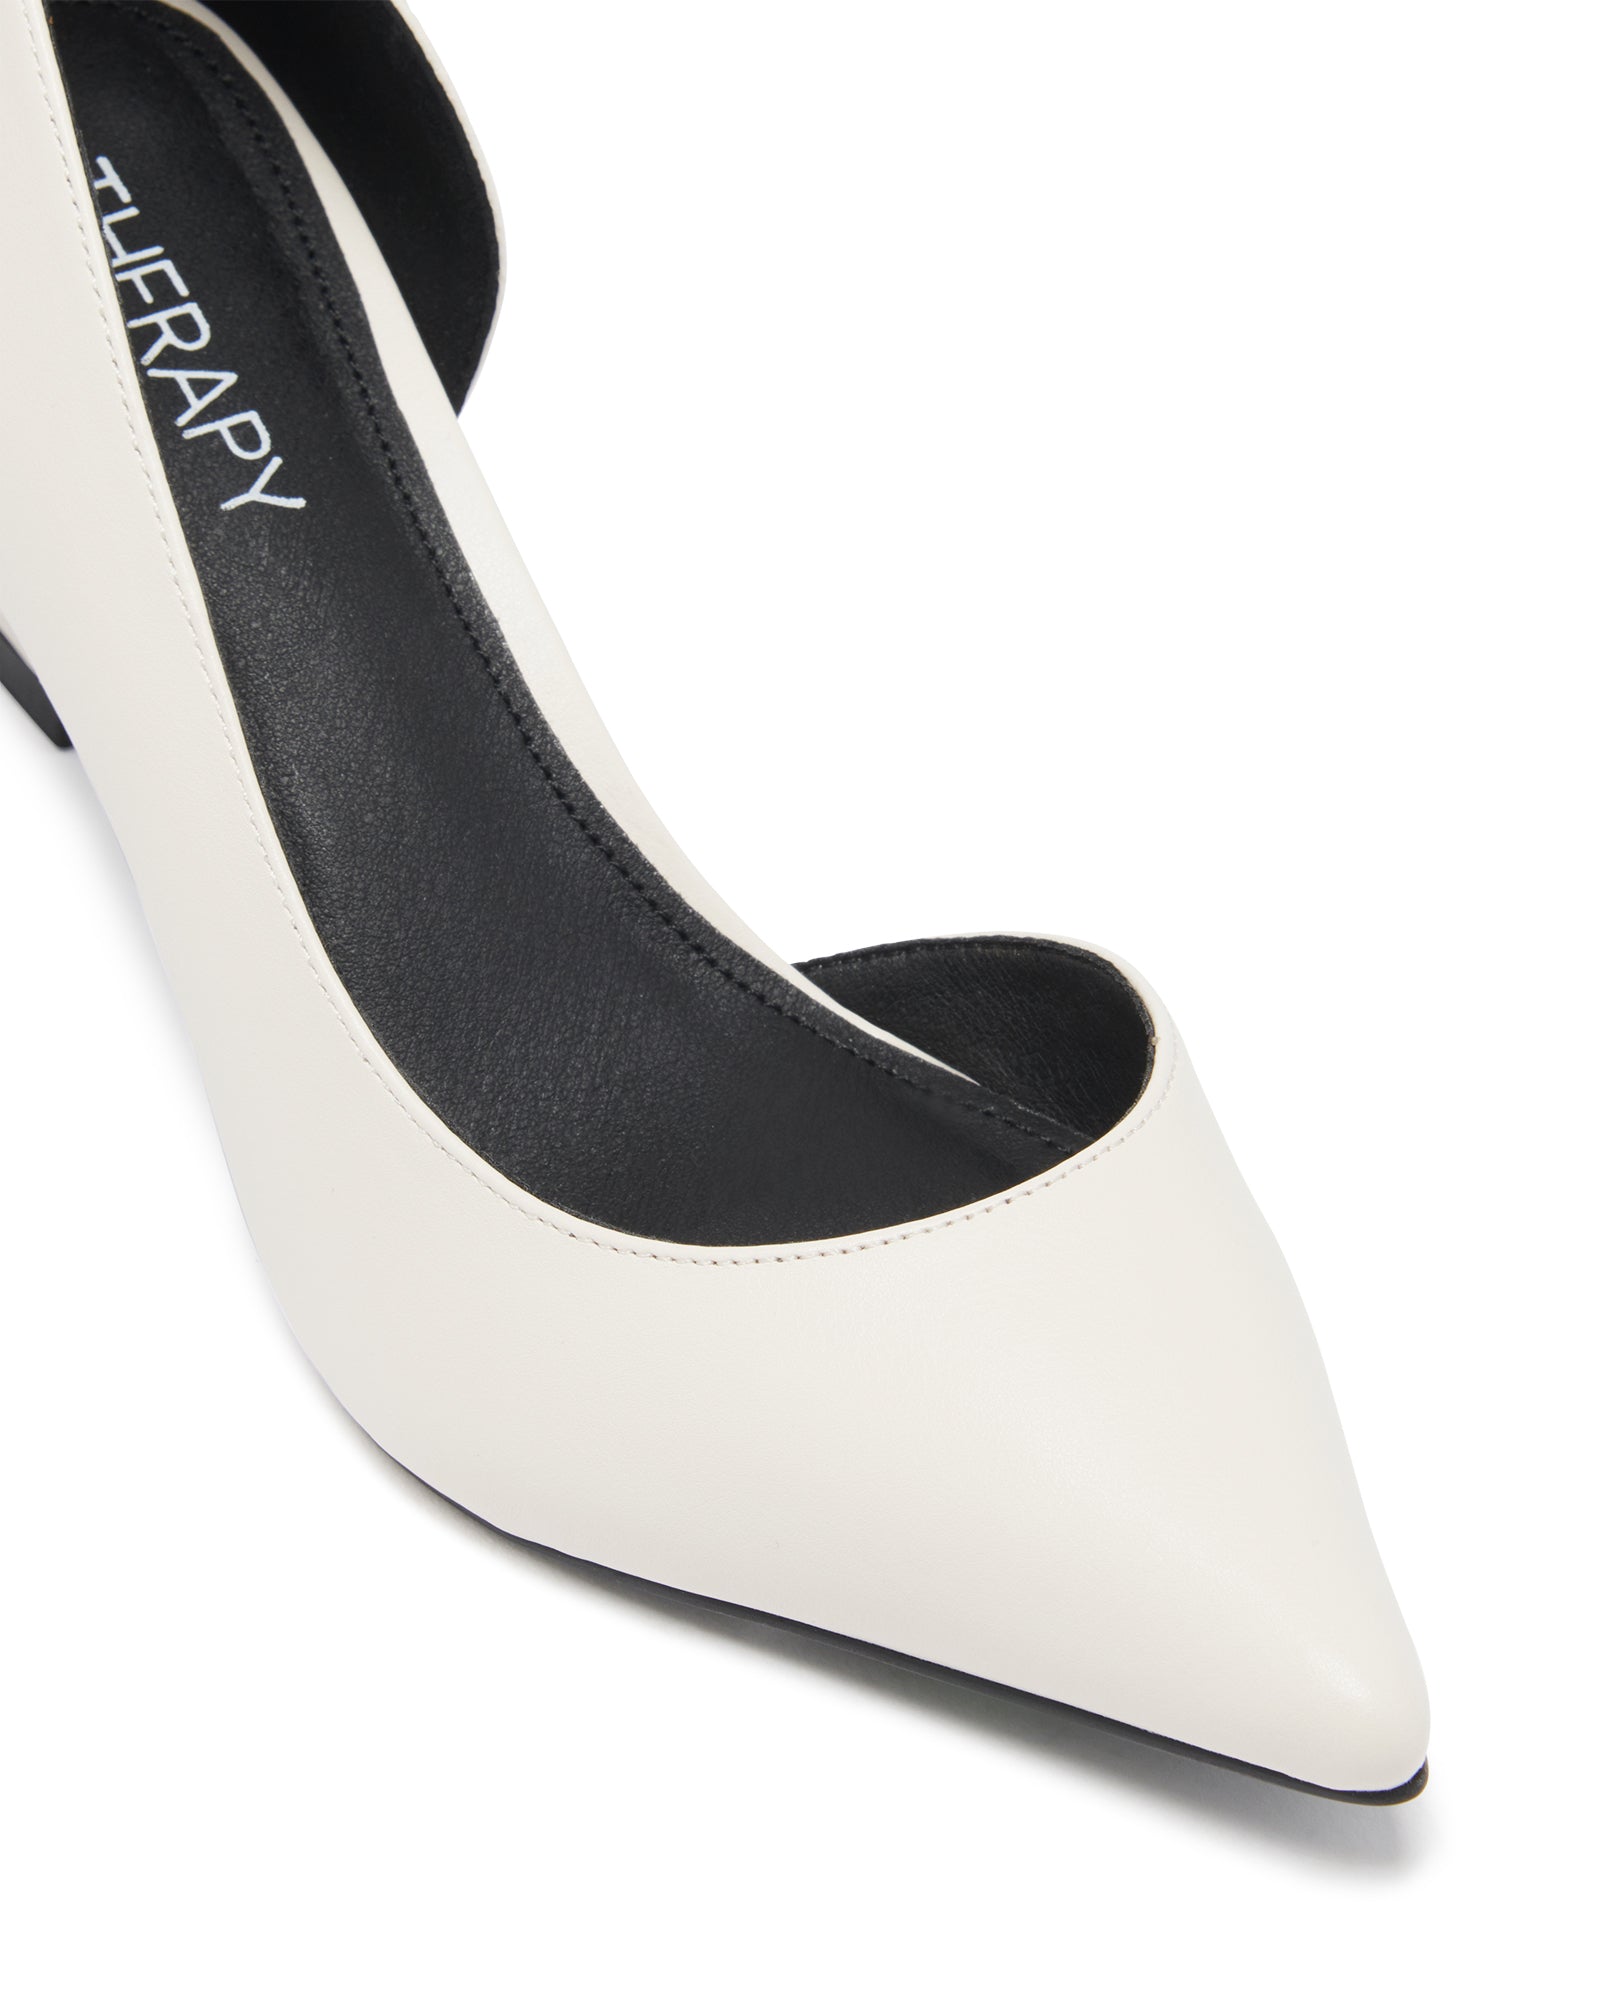 Therapy Shoes Scandal Bone Smooth | Women's Heels | Pumps | Stiletto